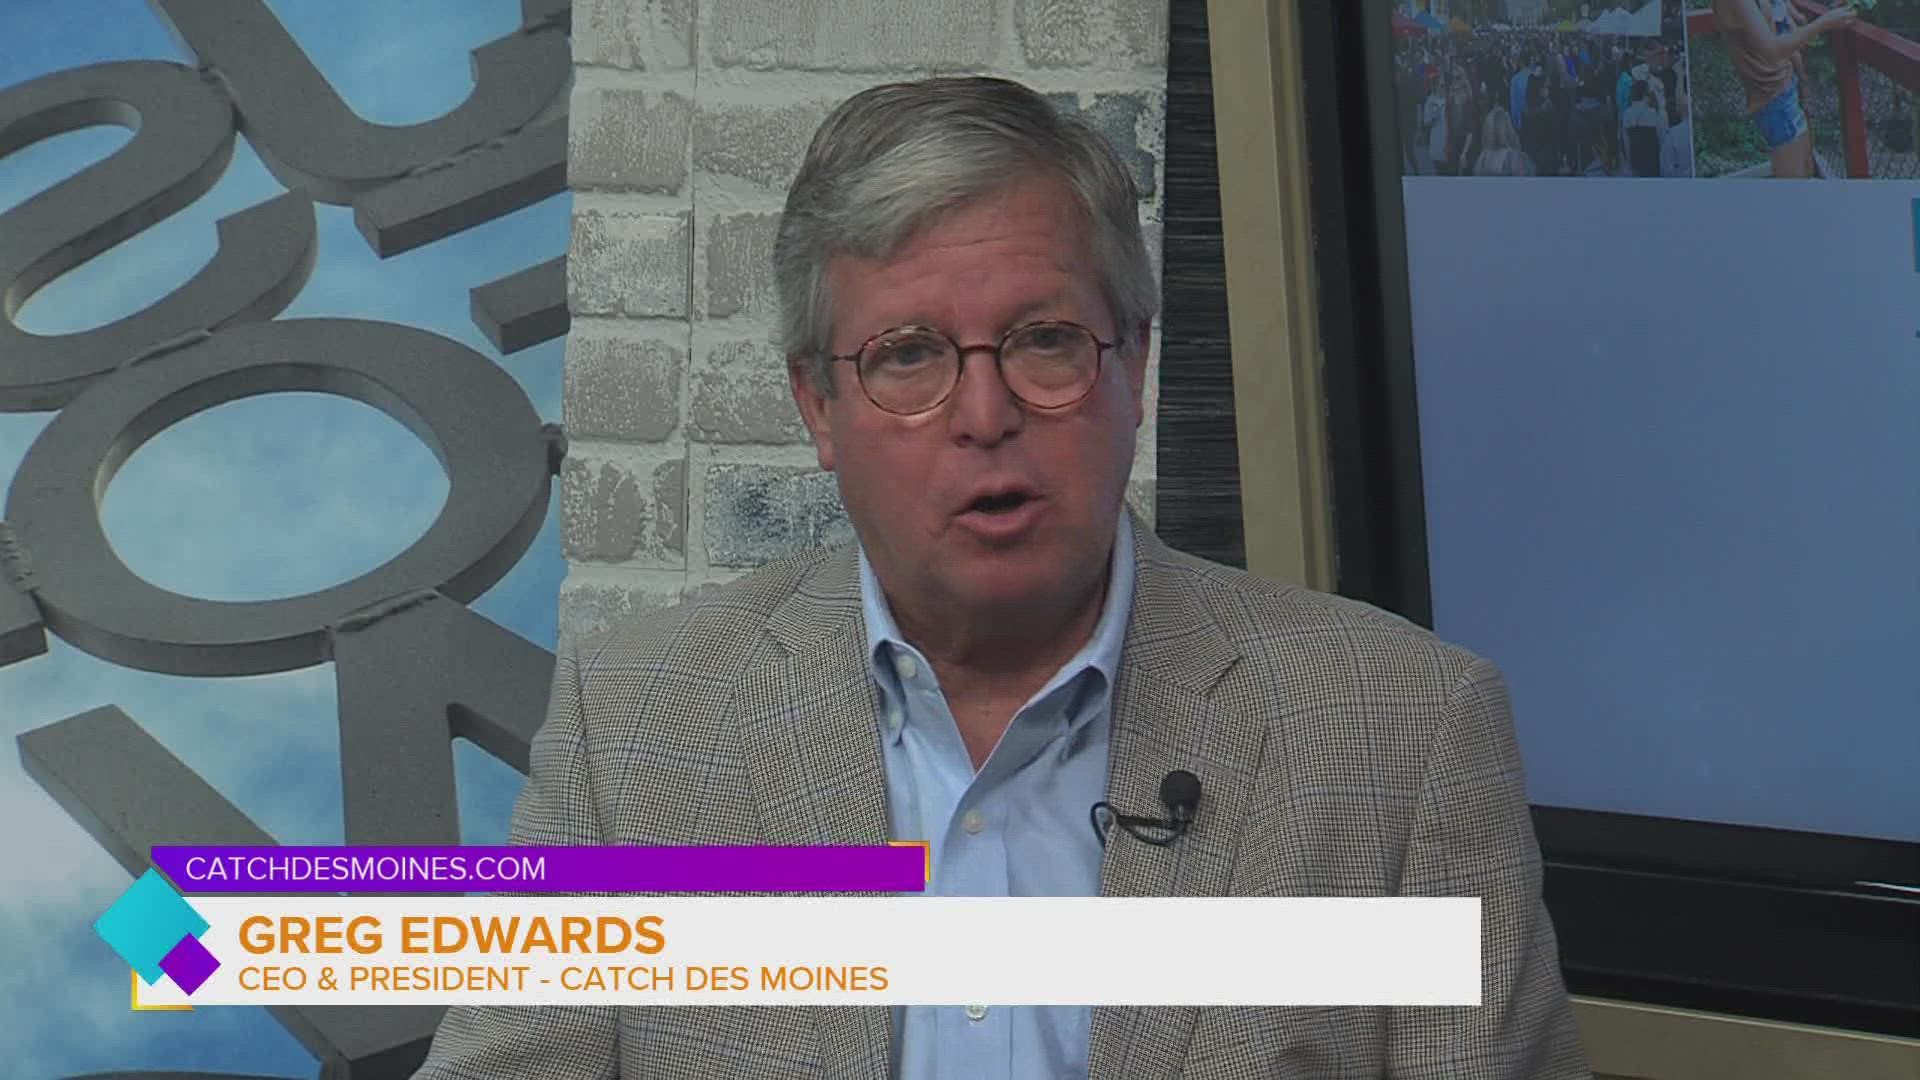 Greg Edwards, President/CEO Catch Des Moines, talks about all the great things going on in the Des Moines area this week to keep you entertained!